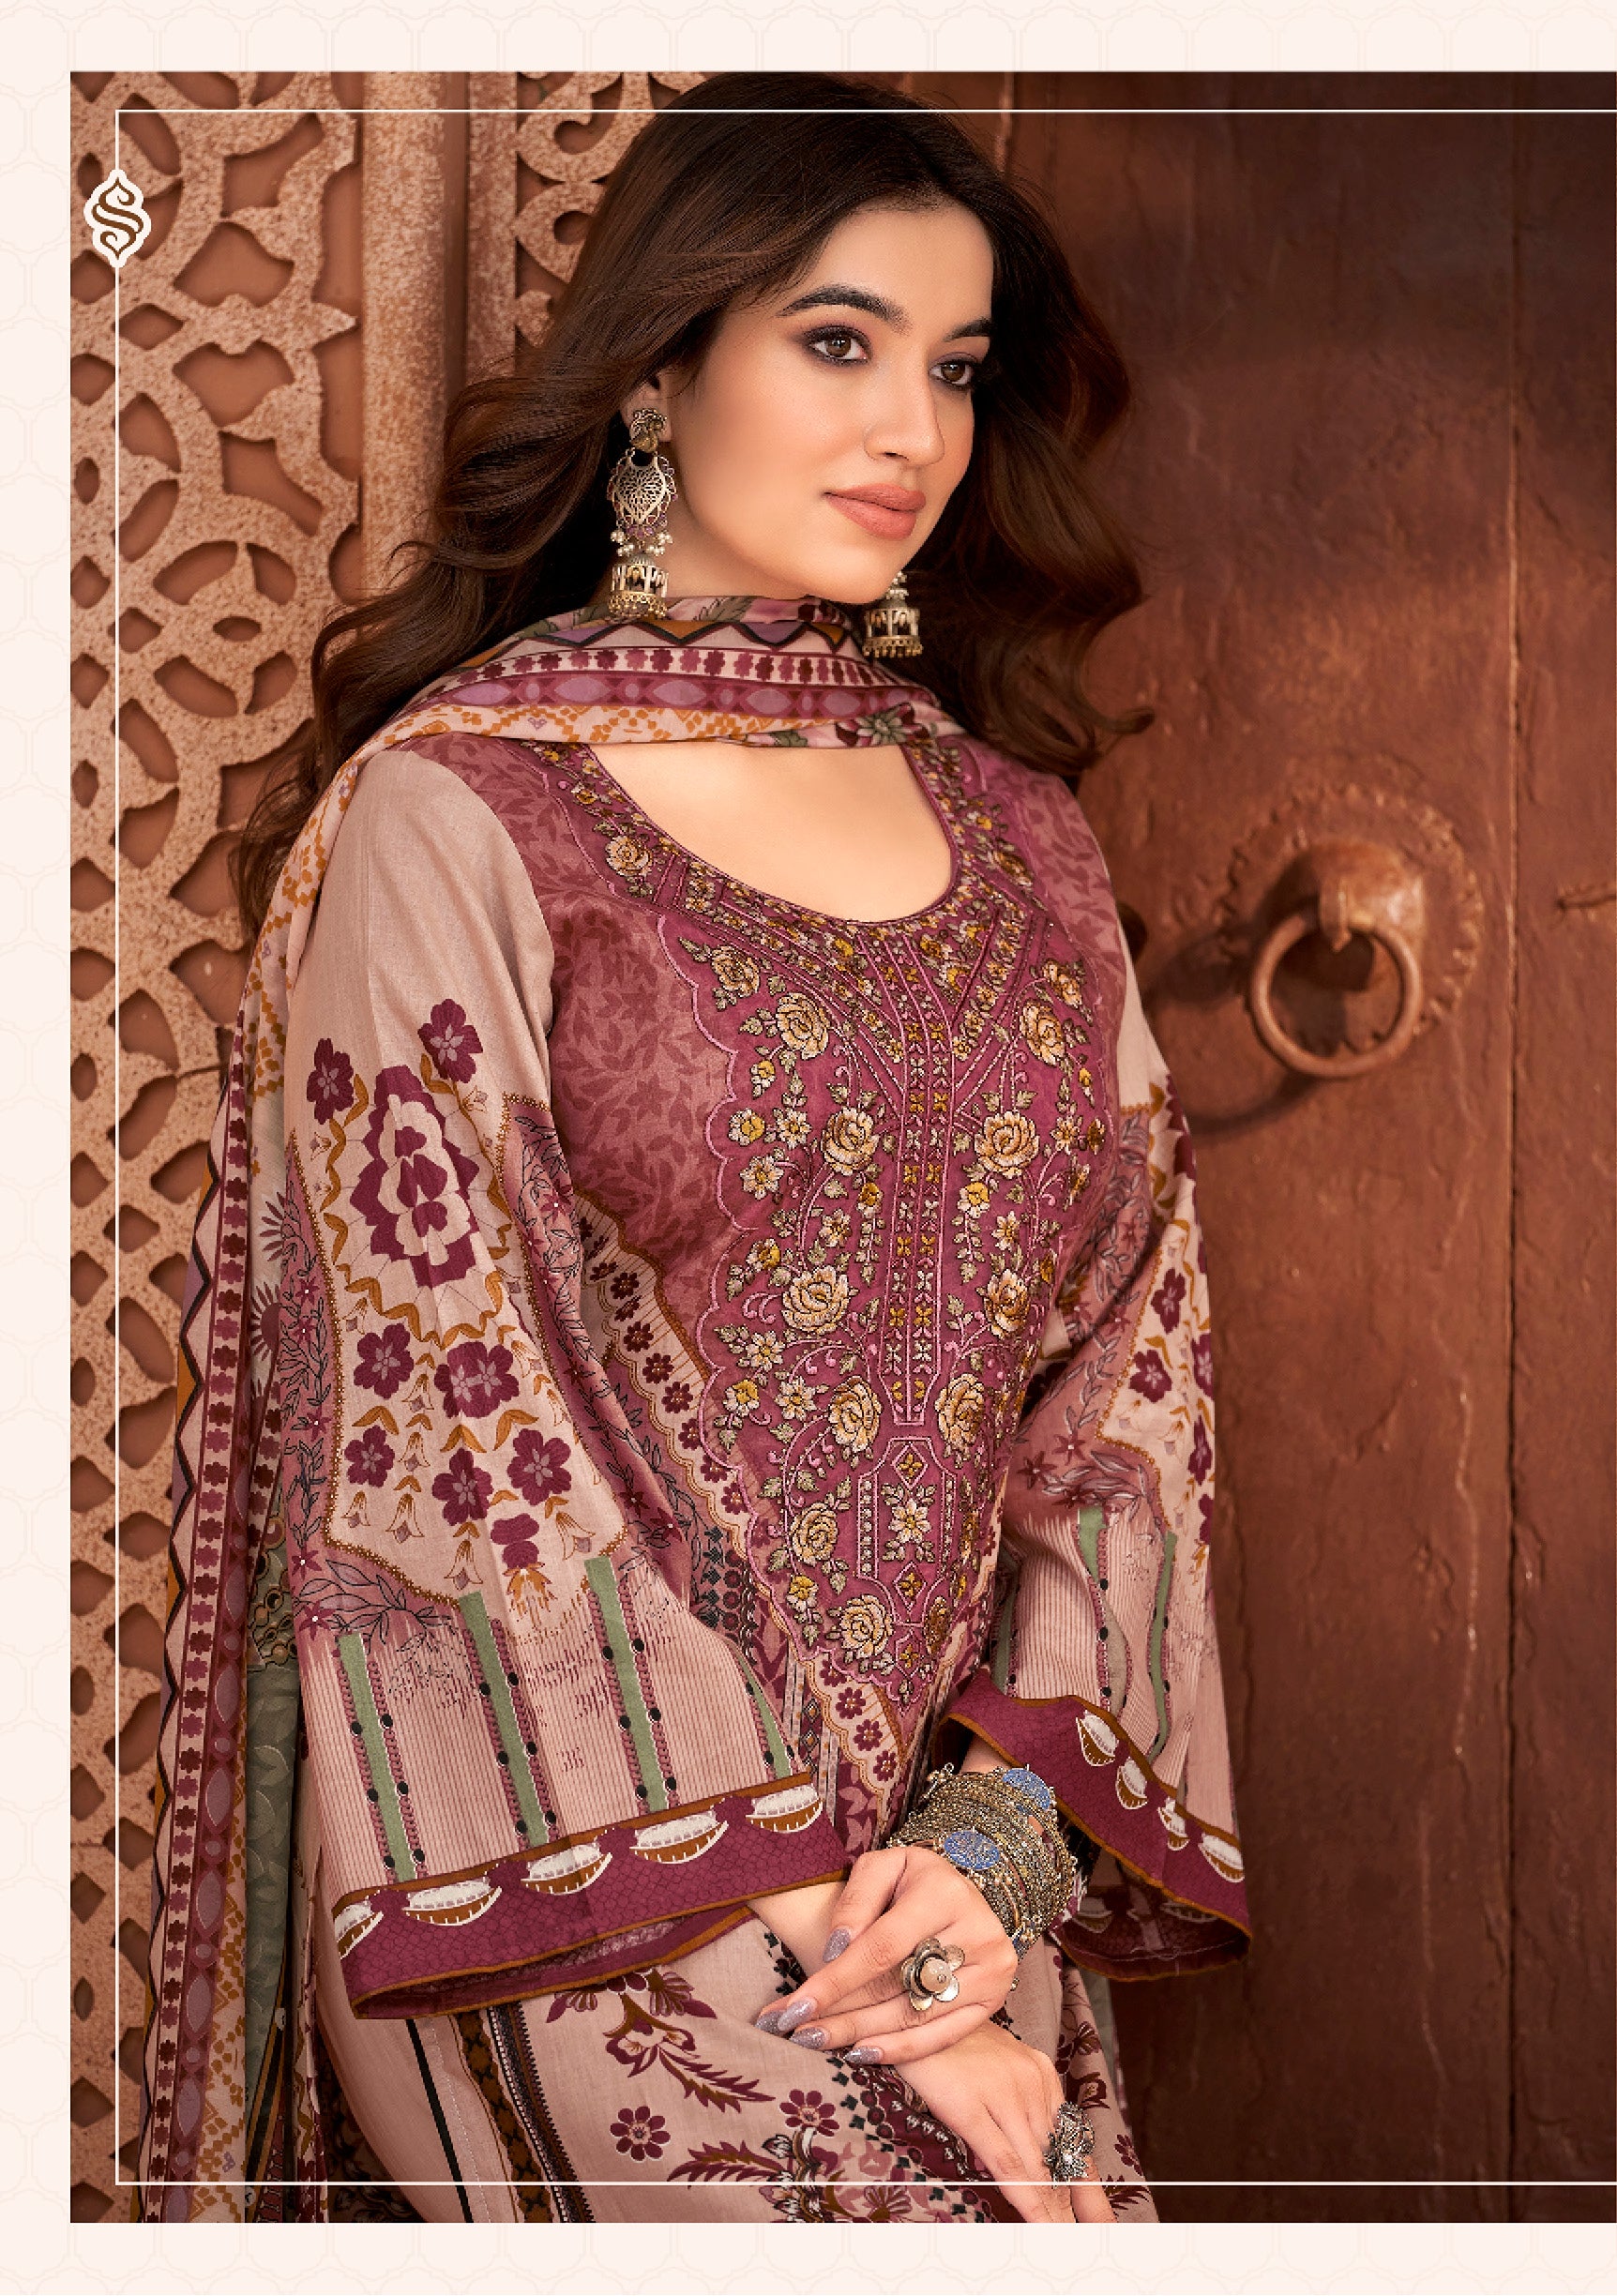 Alok Suit Qudrat Cambric Cotton With Embroidery Work Pakistani Salwar Suits Wholesale Supplier